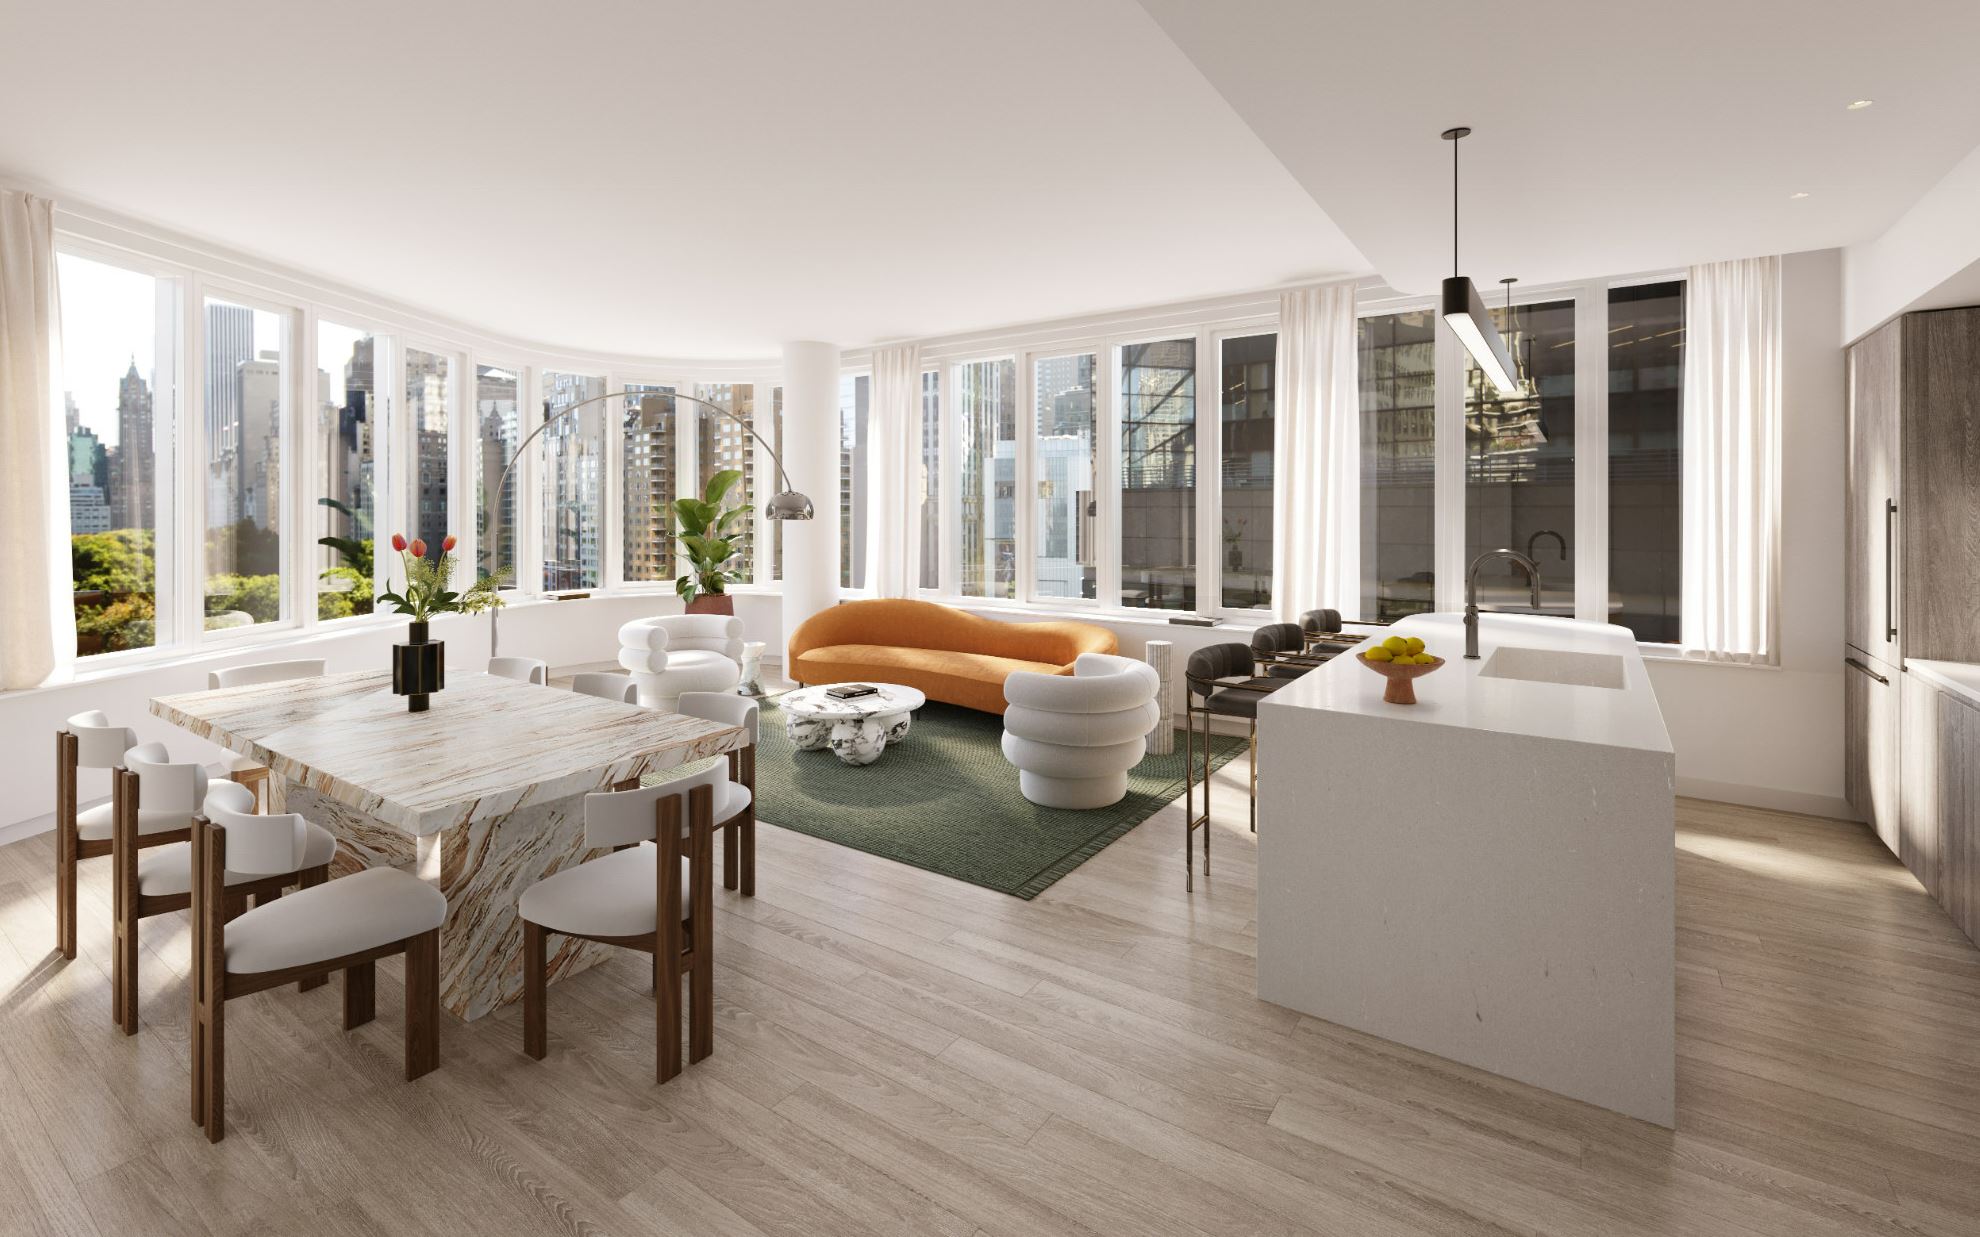 New York City Renters Are Finding New, Creative Ways to Search for the  Perfect Apartment